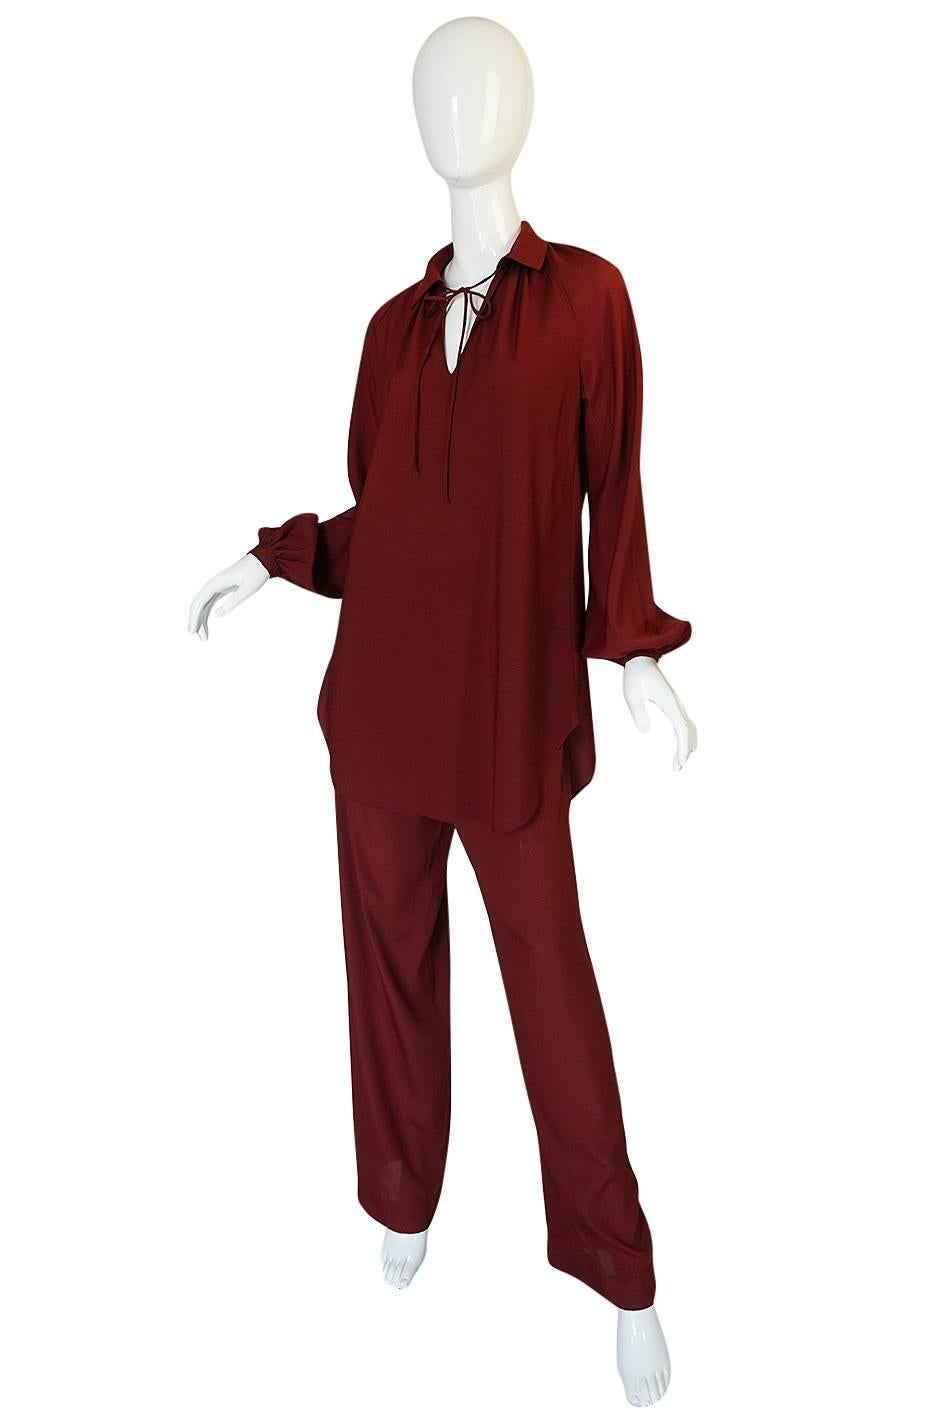 This Halston IV pant and tunic set is made from an easy to care for, easy to wear silky synthetic that is light and easy and that you can wash and wear. The simple, classic design makes it is an easy way to be instantly dressed up and still entirely